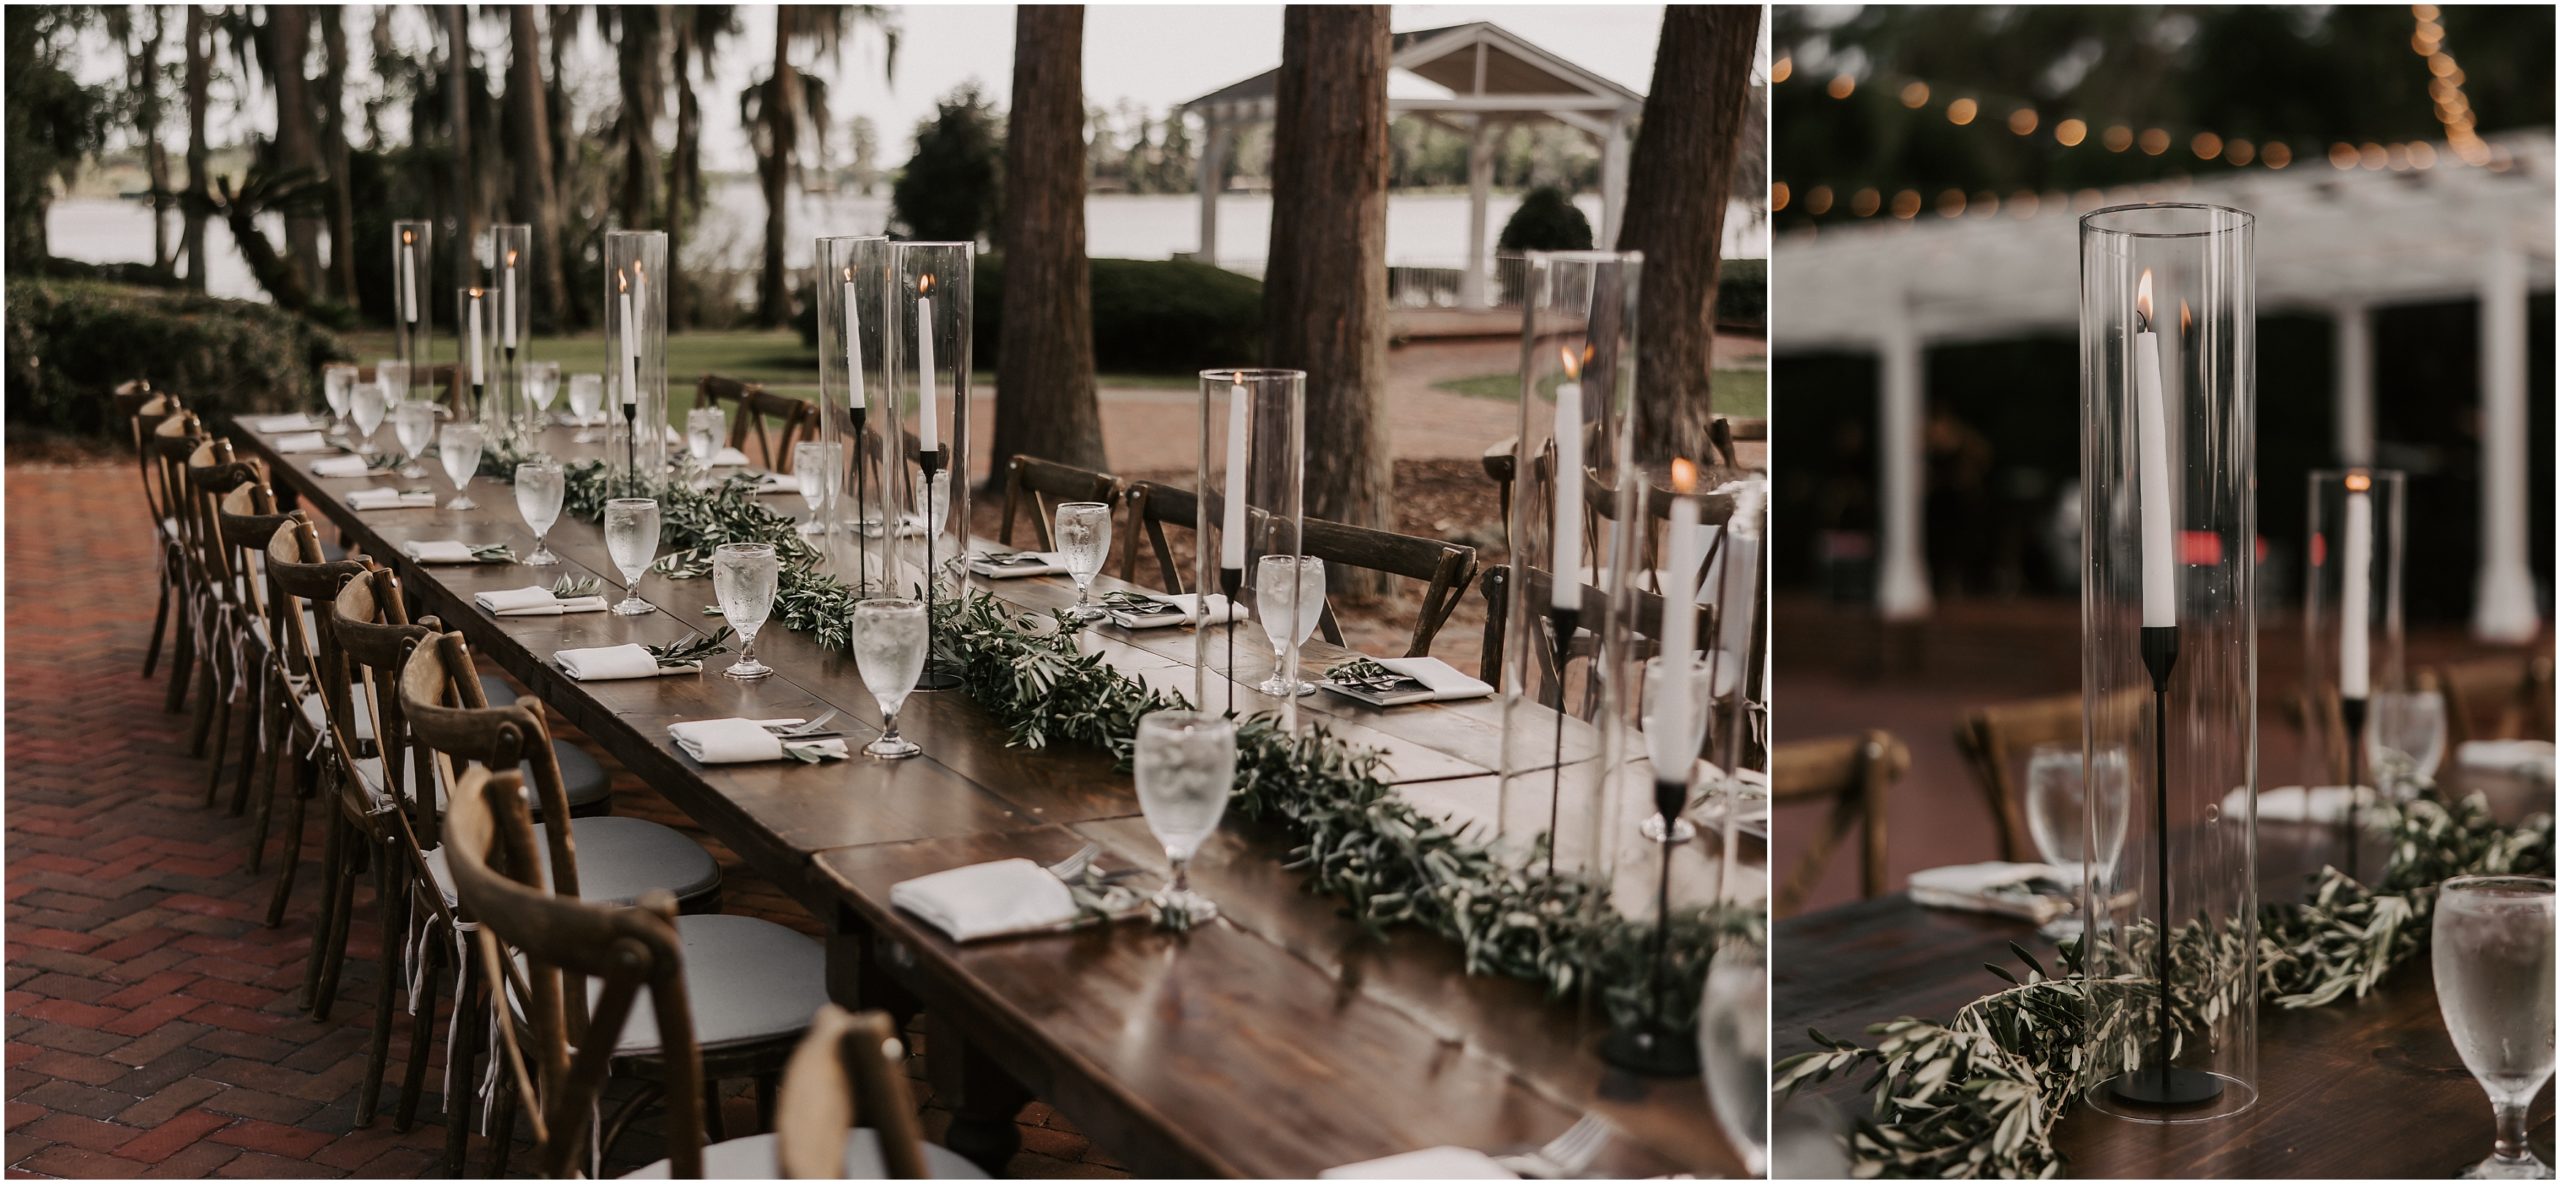 For the reception of this distinguished garden wedding, round and rectangular tables were the perfect mix together with lush greenery garlands spanning the table length and centerpieces with blooms that brought on romantic vibes. 